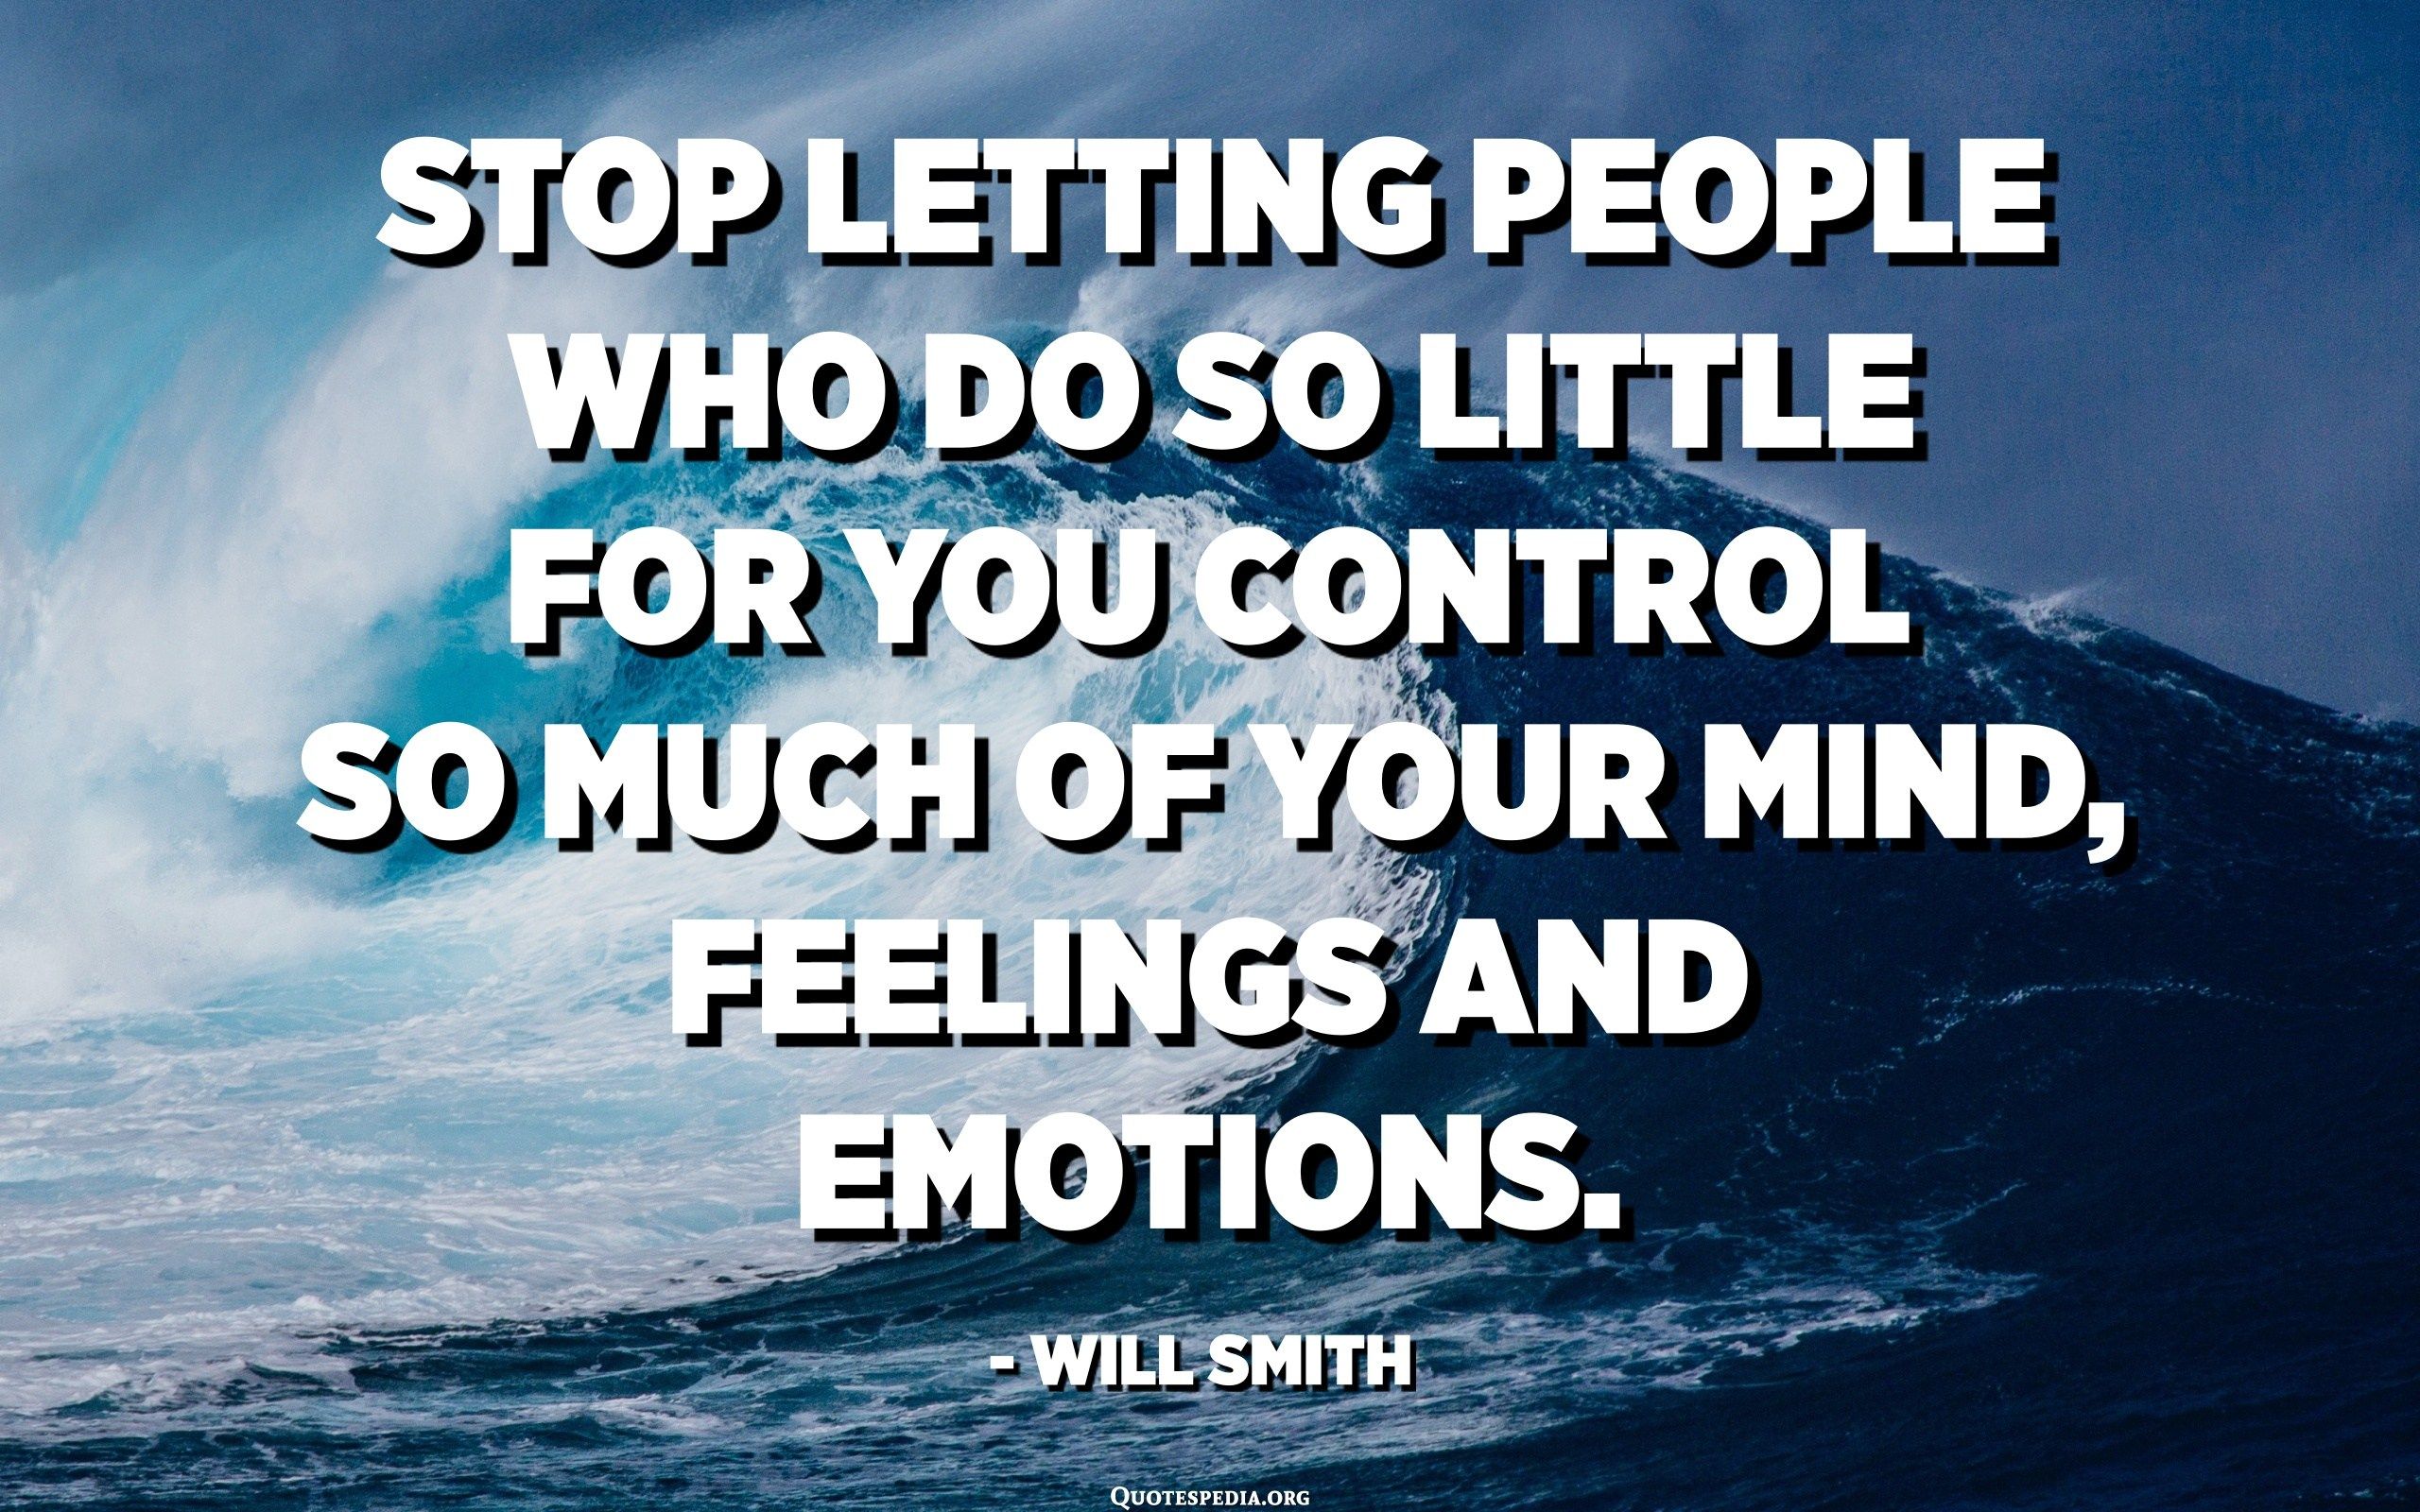 Stop letting people who do so little for you control so much of your mind, feelings and emotions